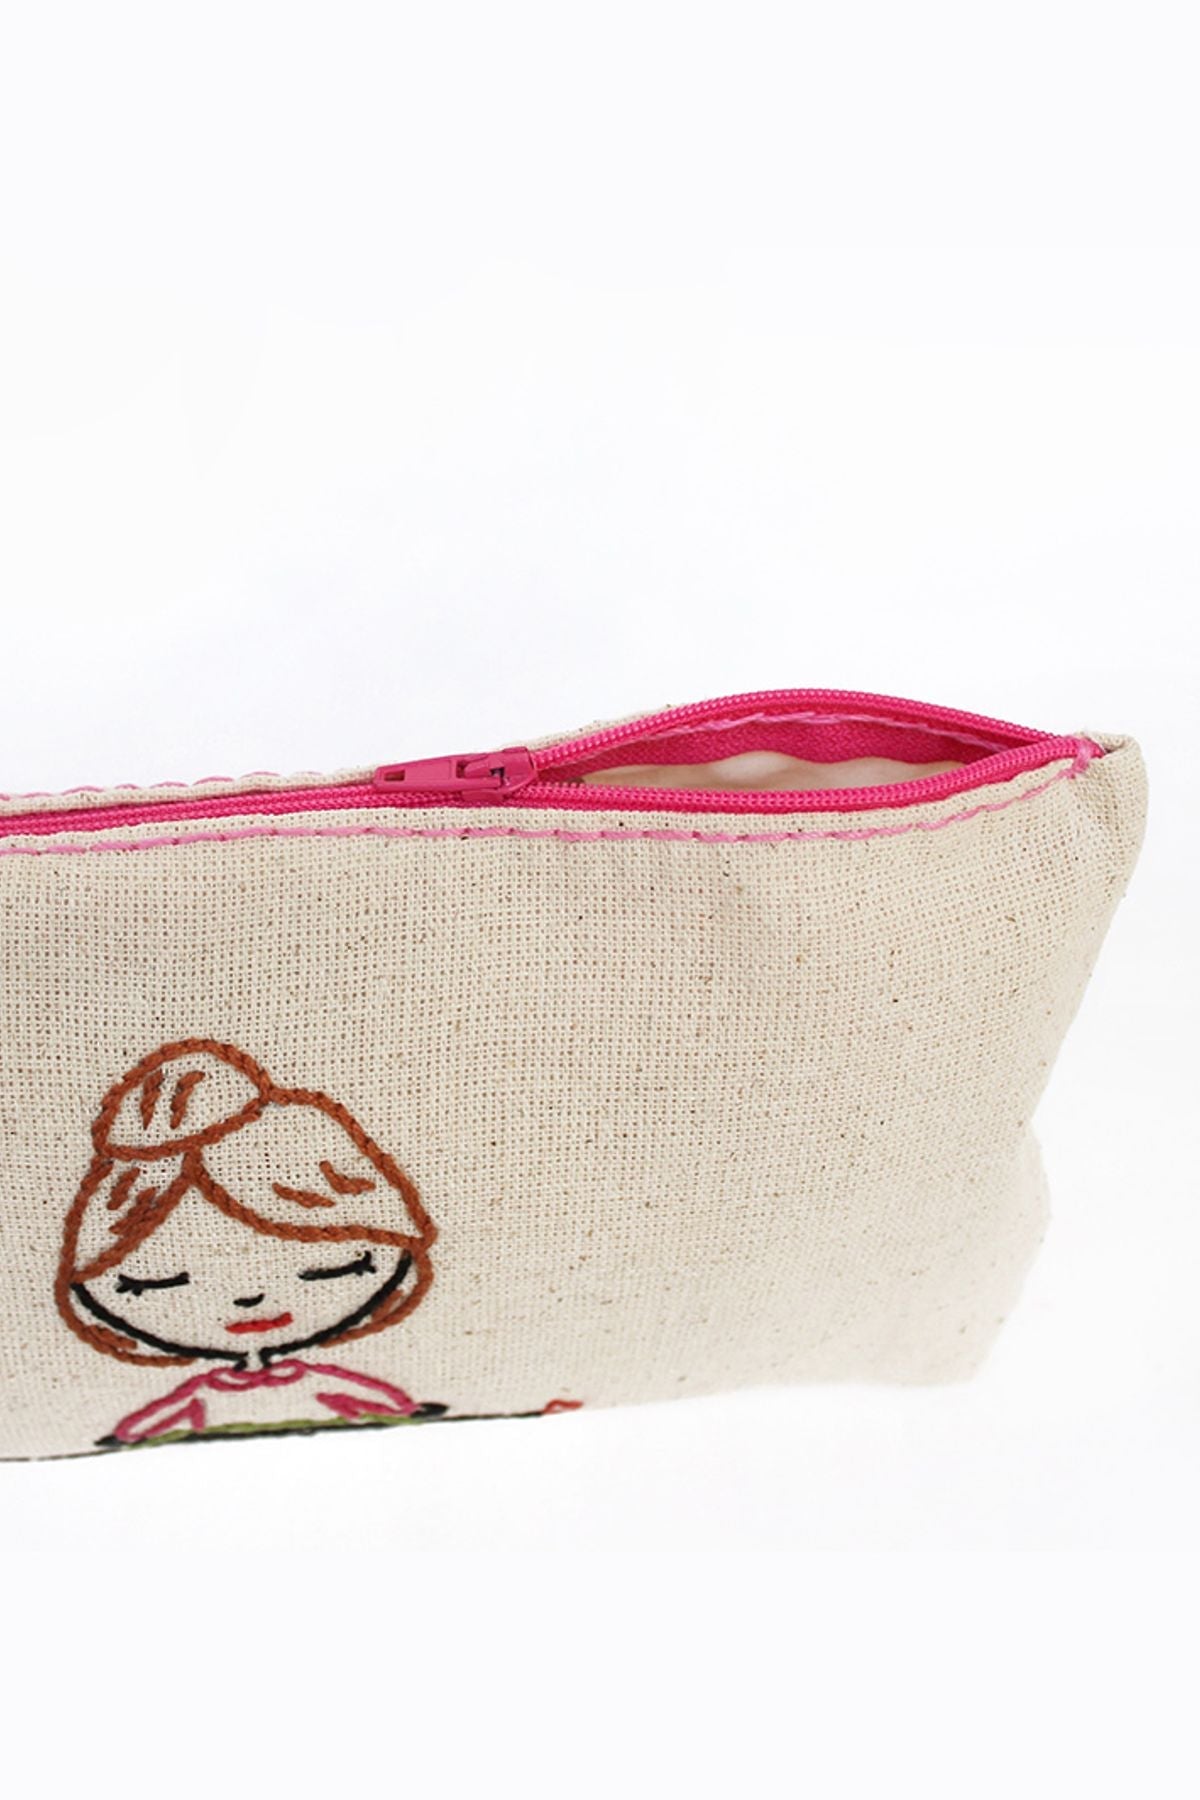 Hand Made Make Up Bag With Yoga Pattern Mix